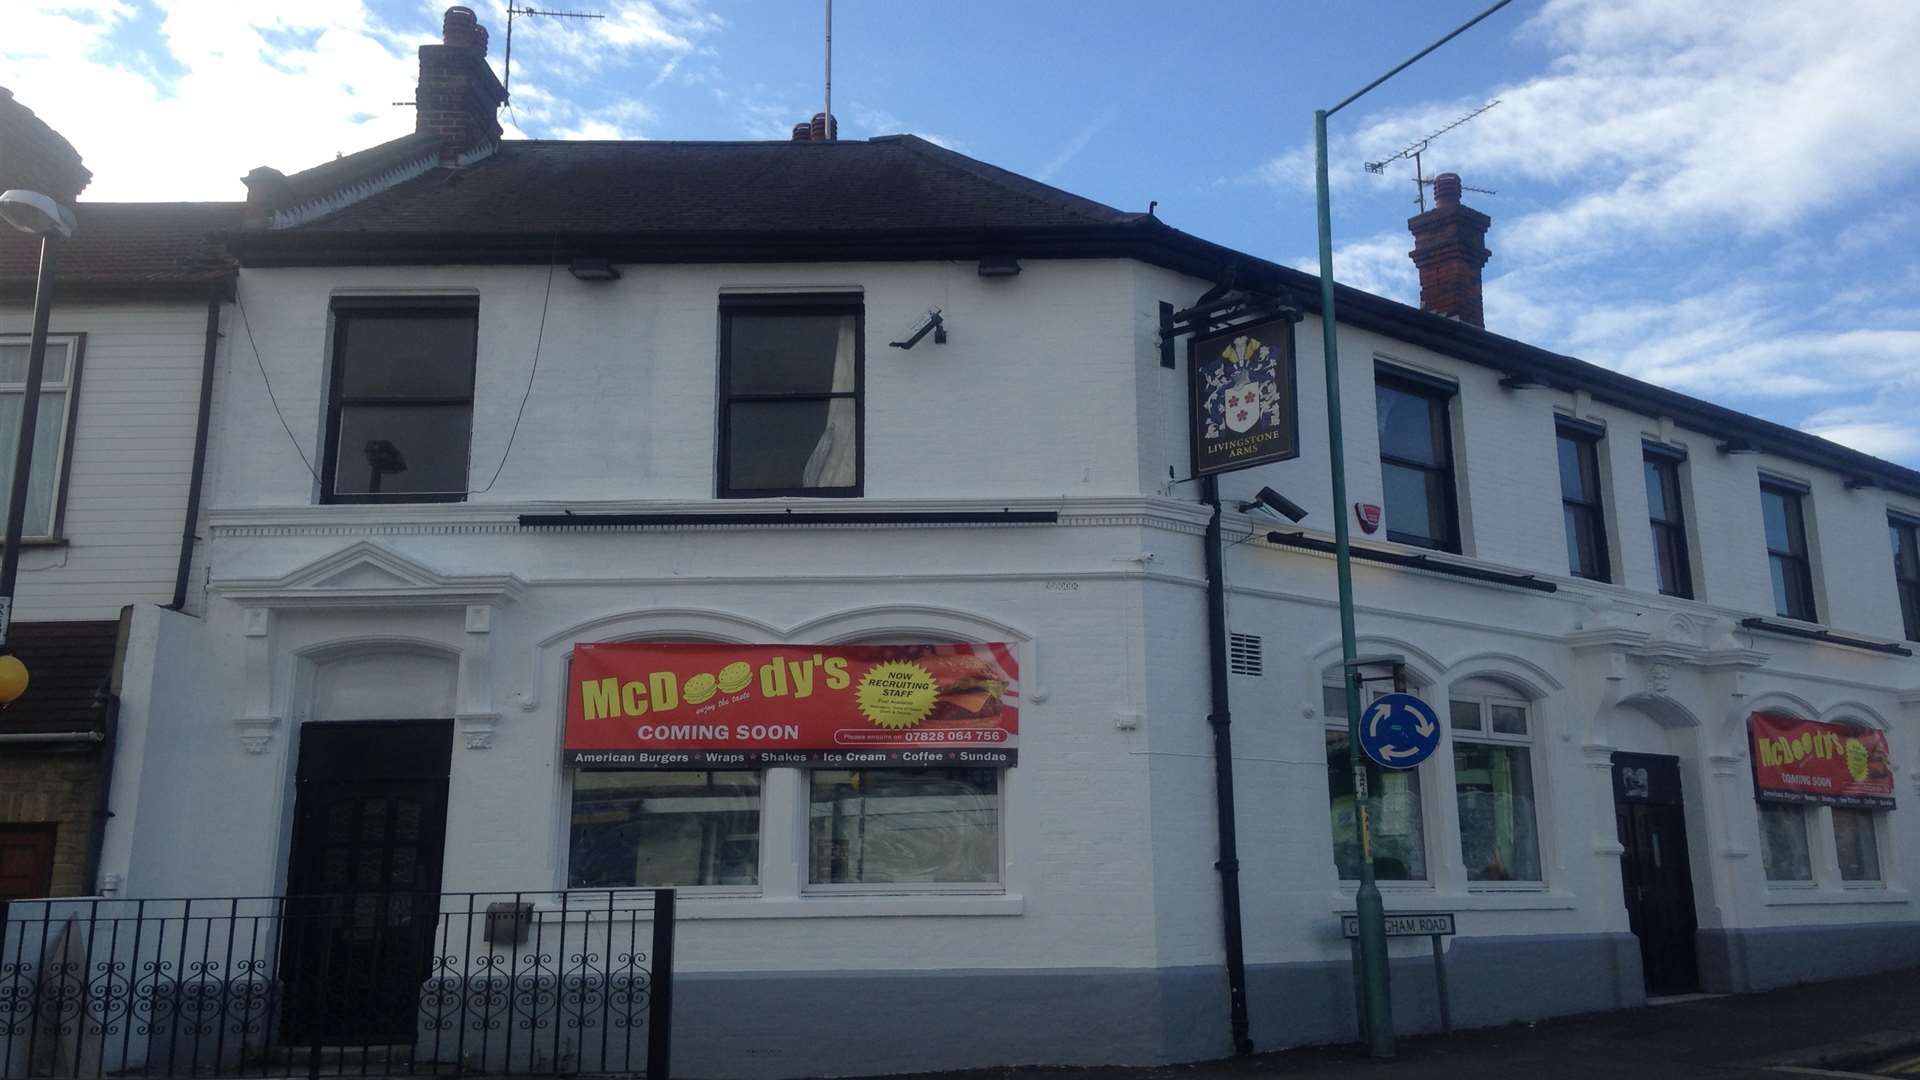 The Livingstone Arms pub in Gillingham is to become a diner called McDoody's